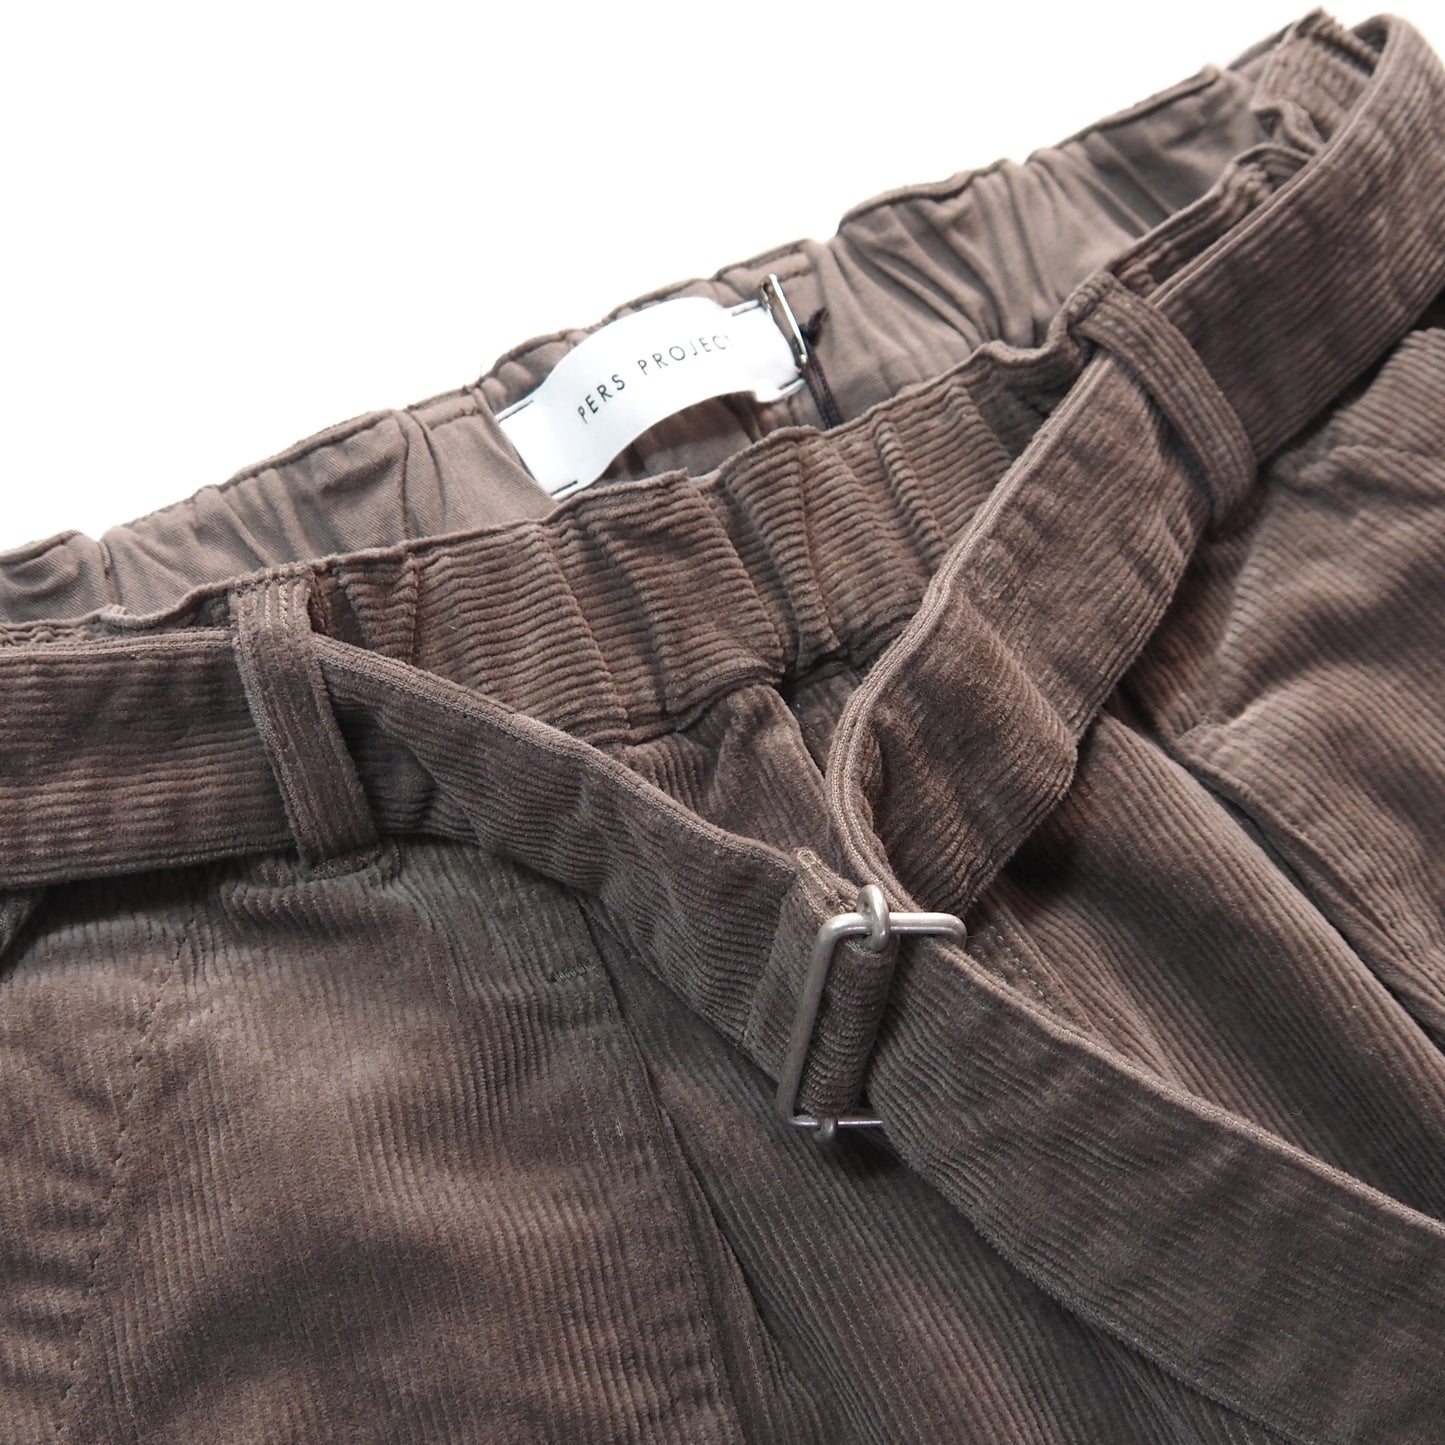 DEVIN CORD BELTED TROUSERS [22FW-23101]